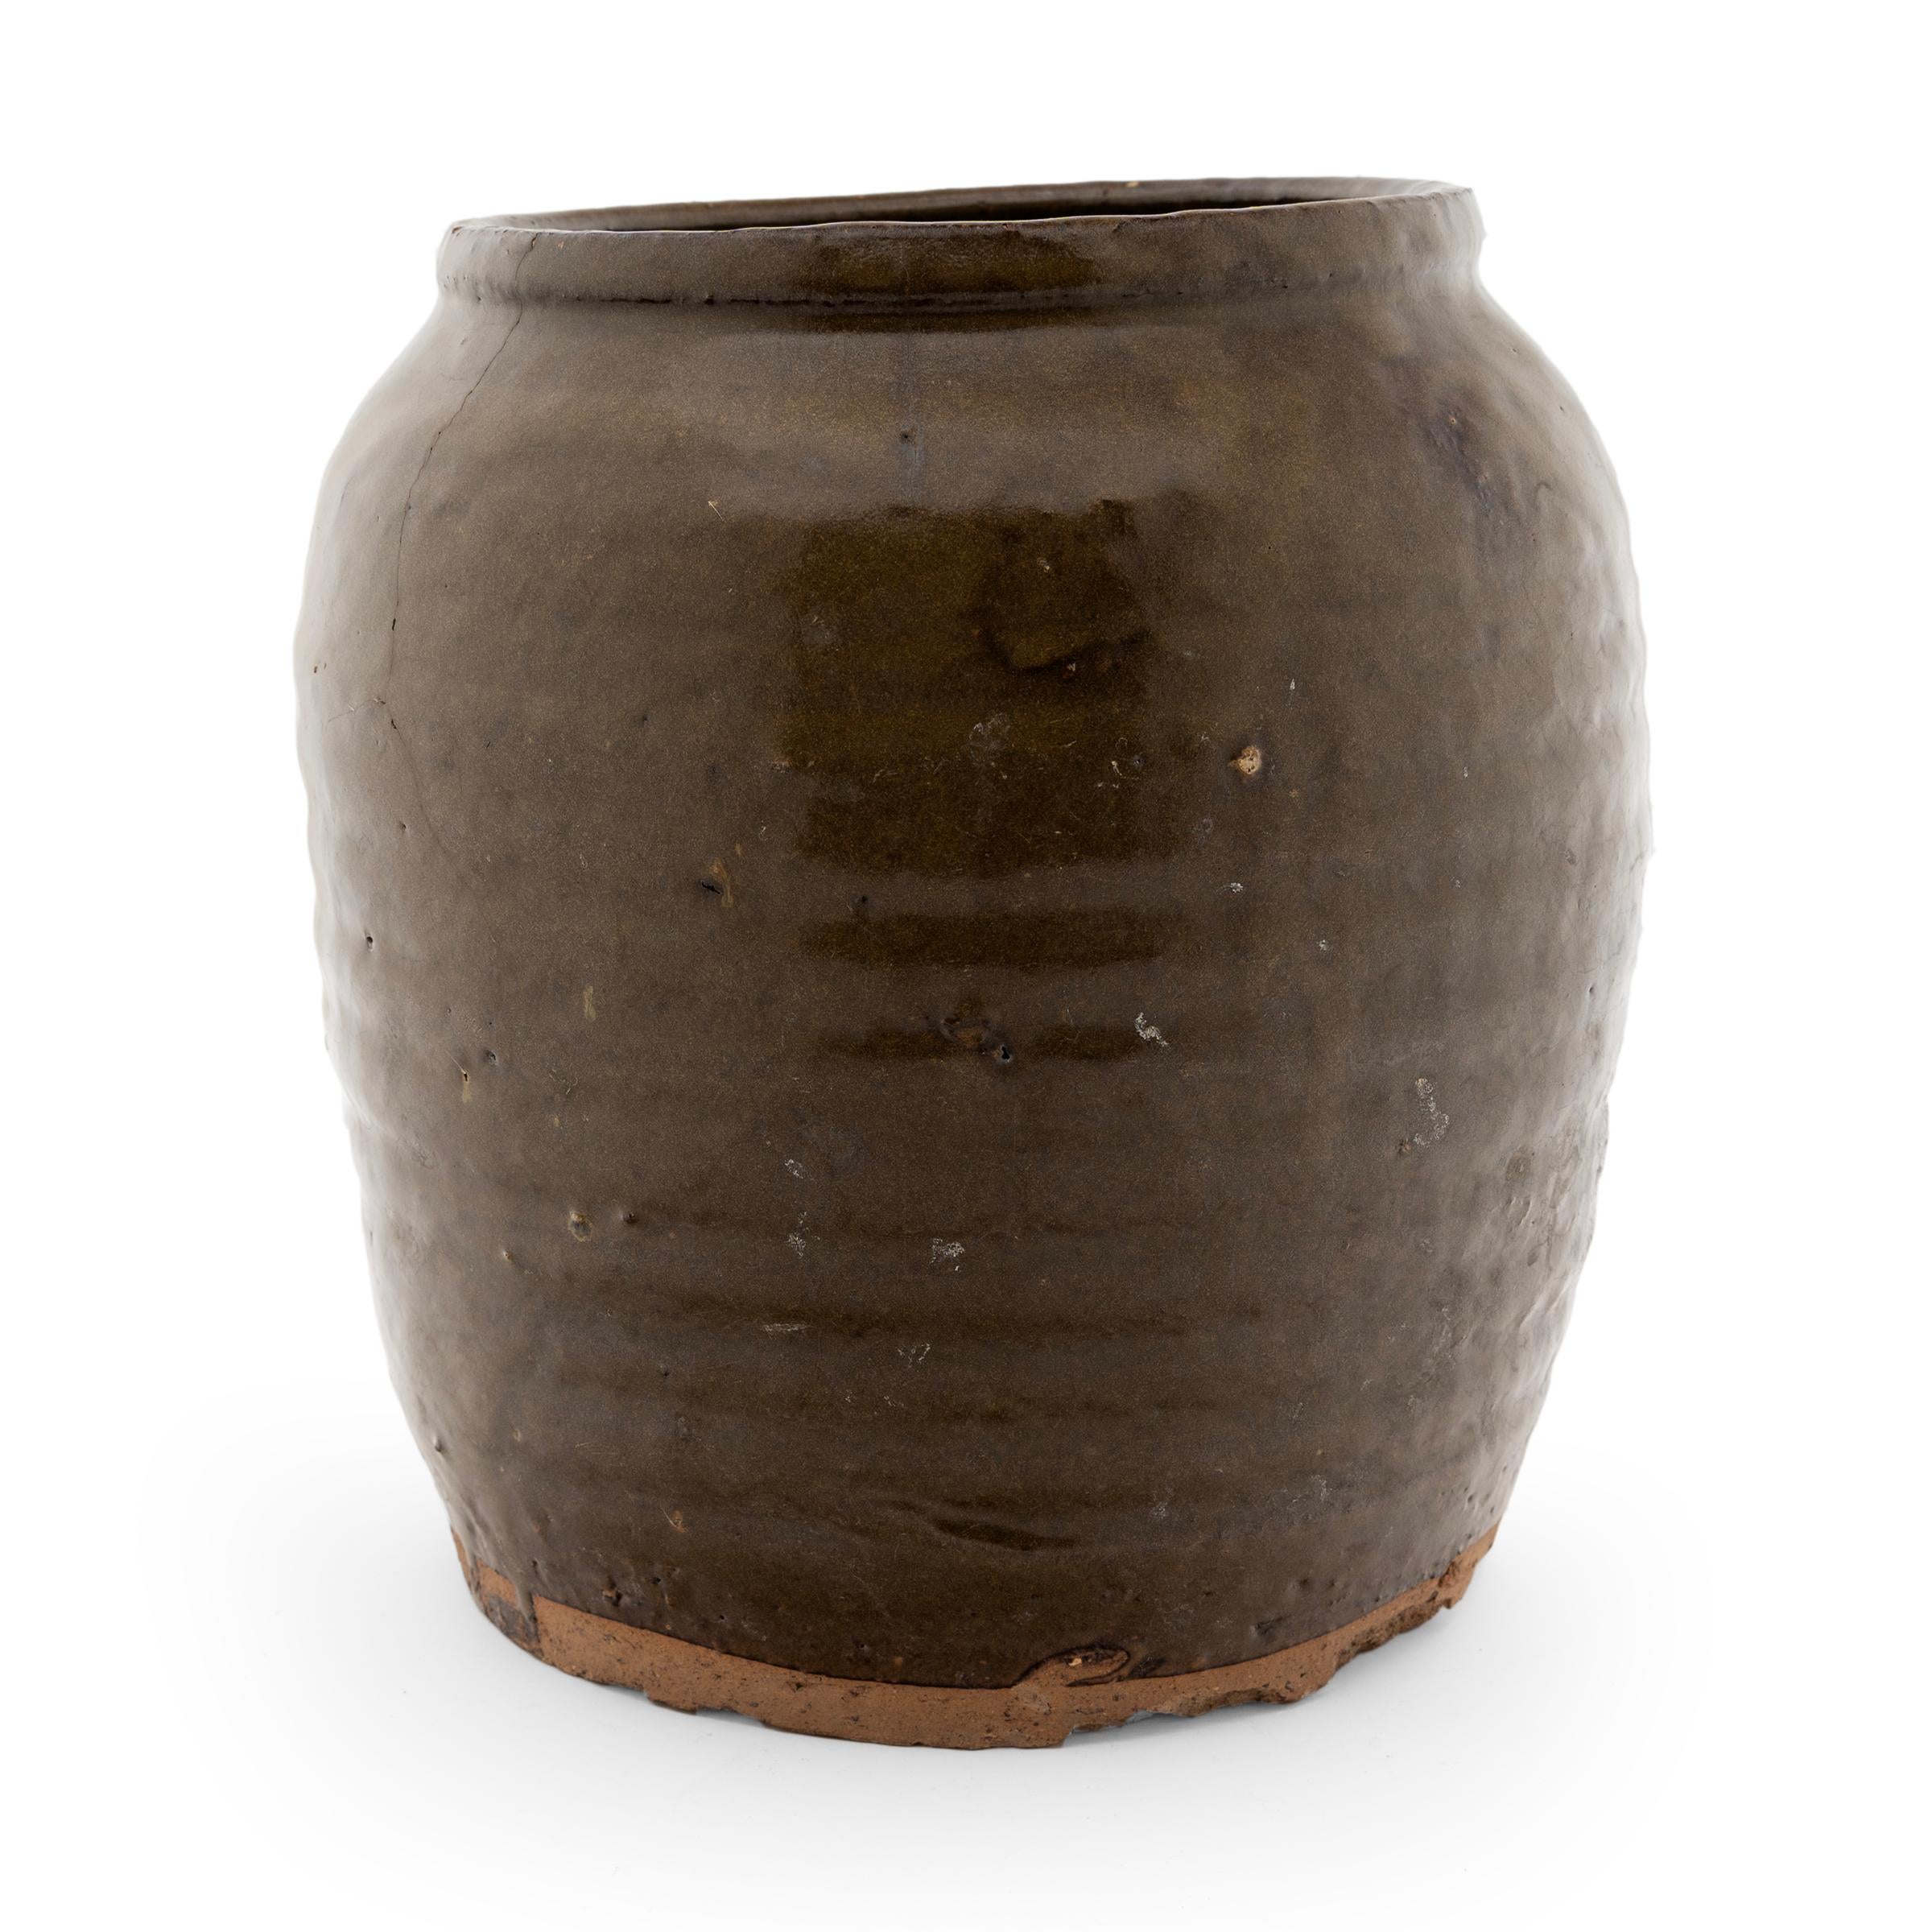 Opaque brown glaze cloaks the stout body of this early 20th-century terra cotta kitchen jar. As evidenced by the glazed interior, this wide-mouth jar was used in a provincial Chinese kitchen for fermenting foods and condiments. The slightly tapered